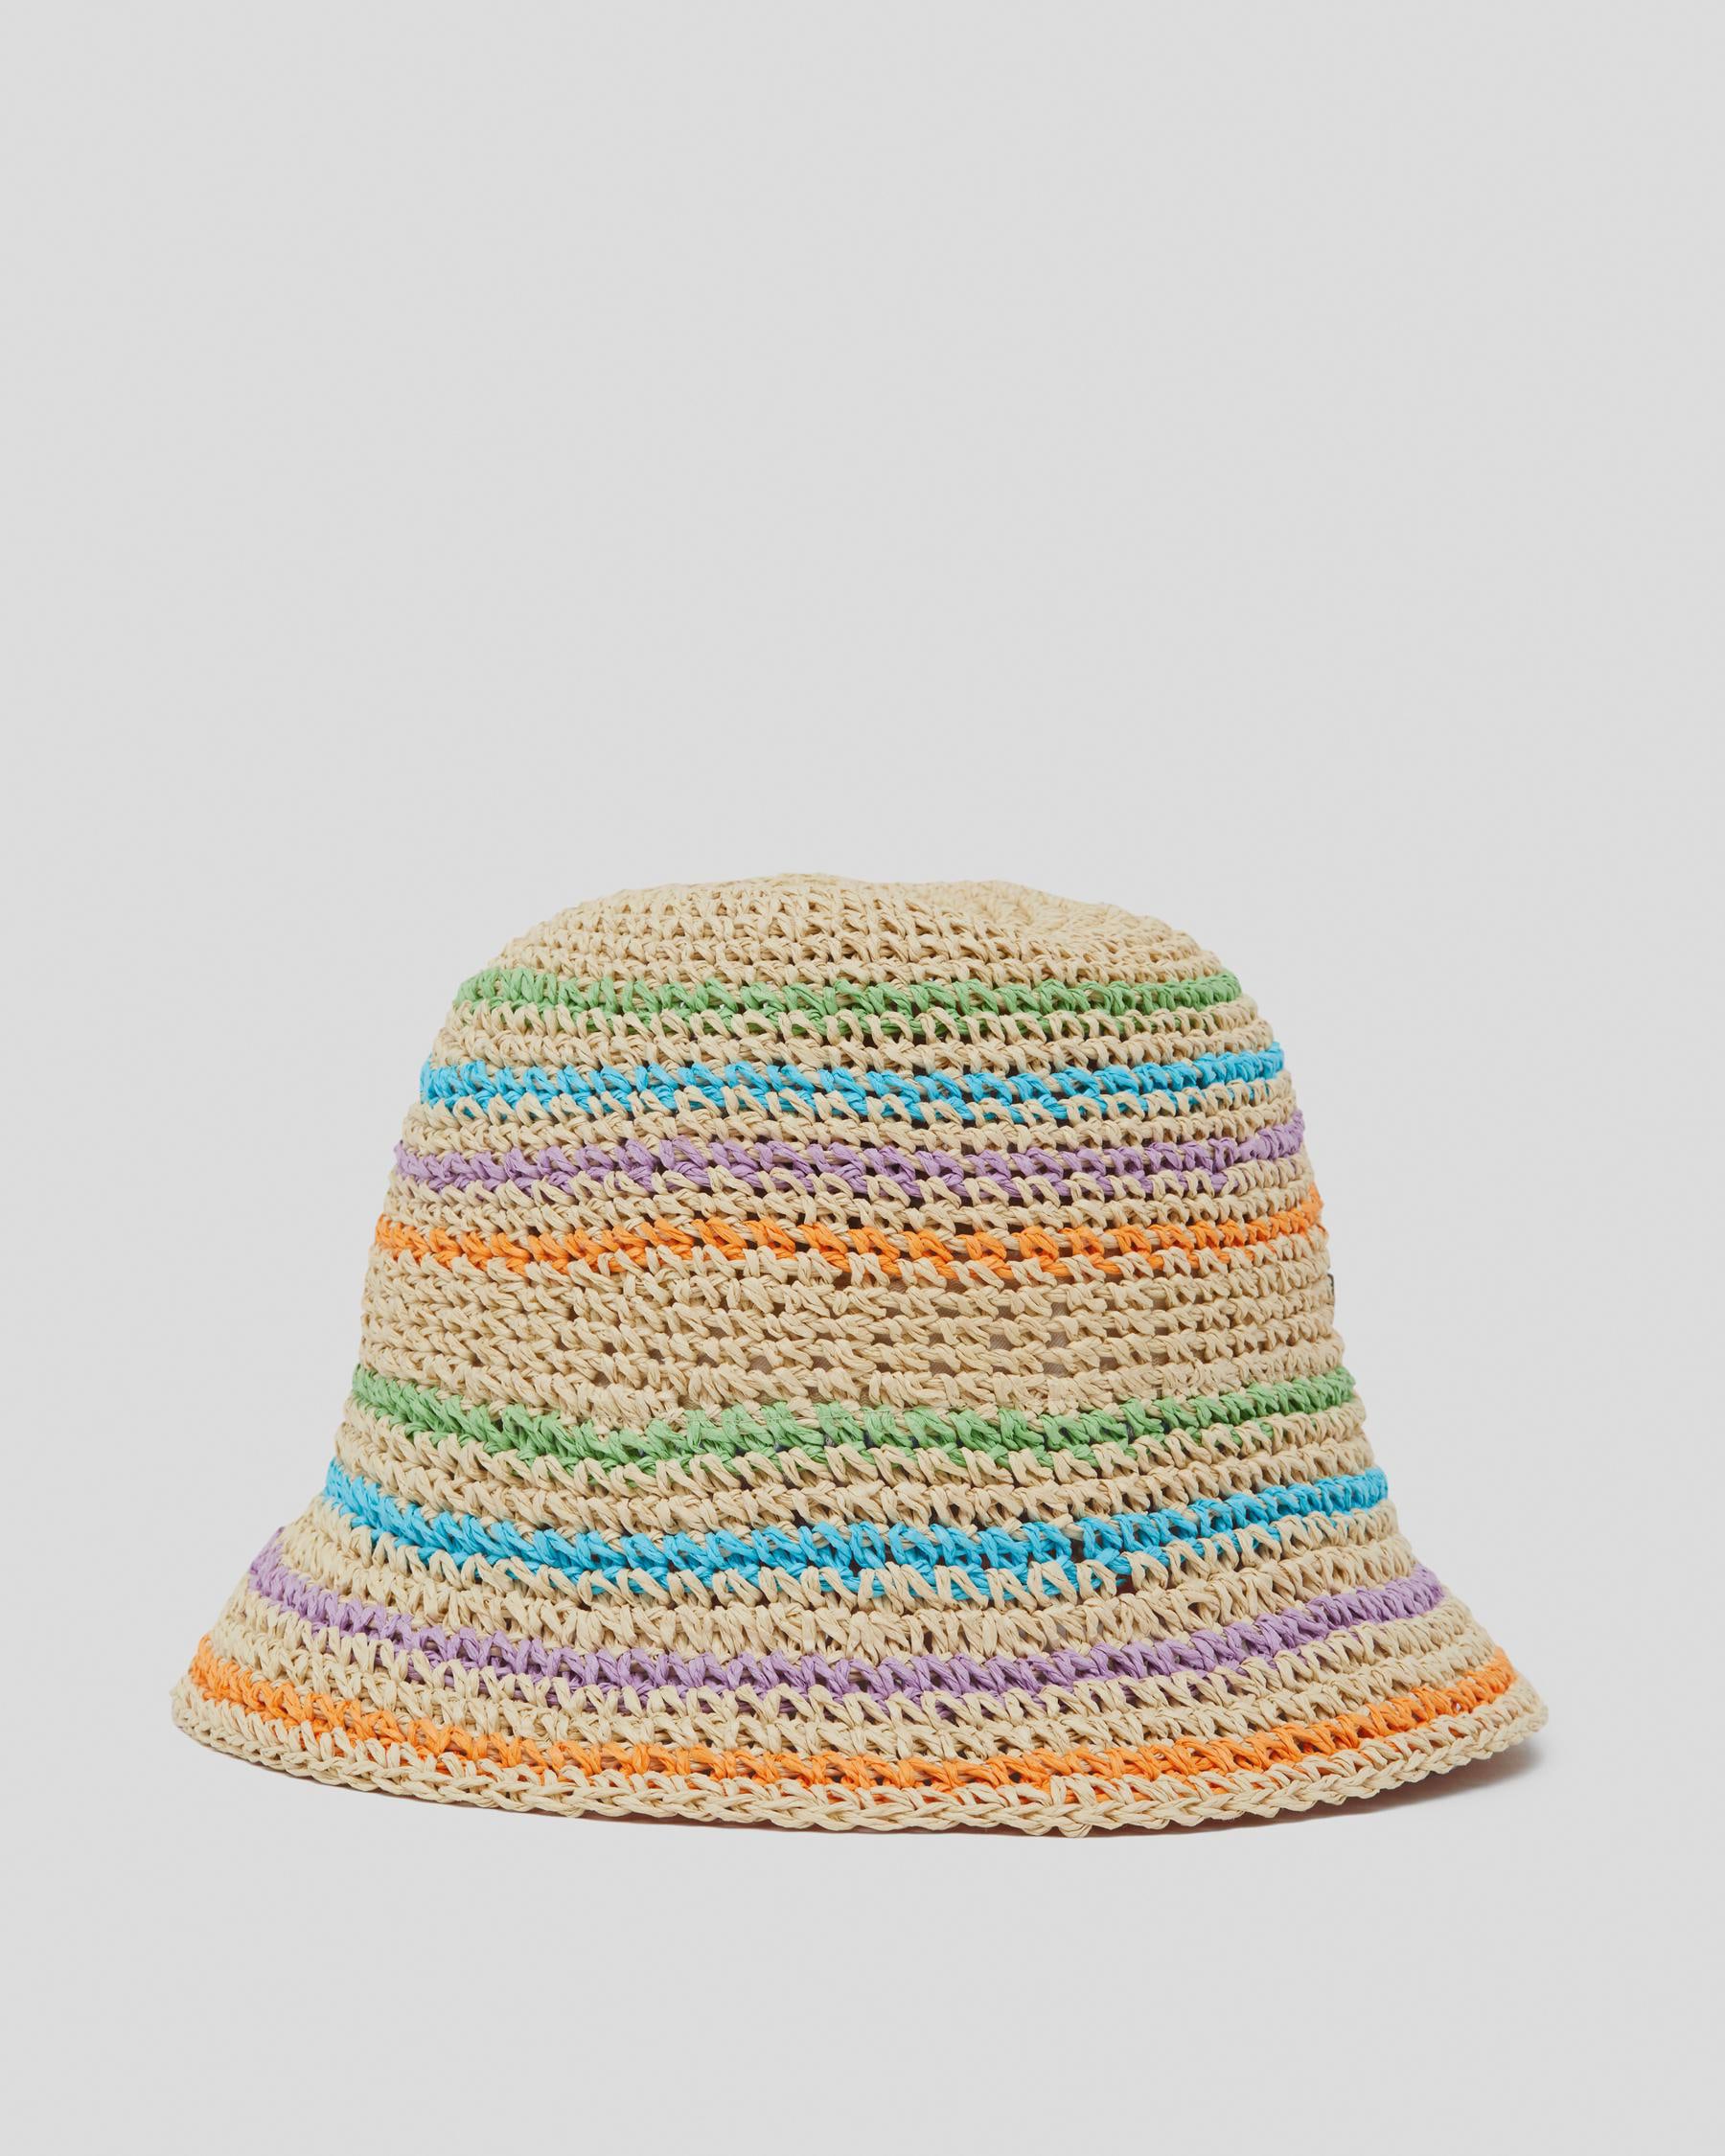 Roxy Barrier Reef Straw Hat In Natural - Fast Shipping & Easy Returns ...